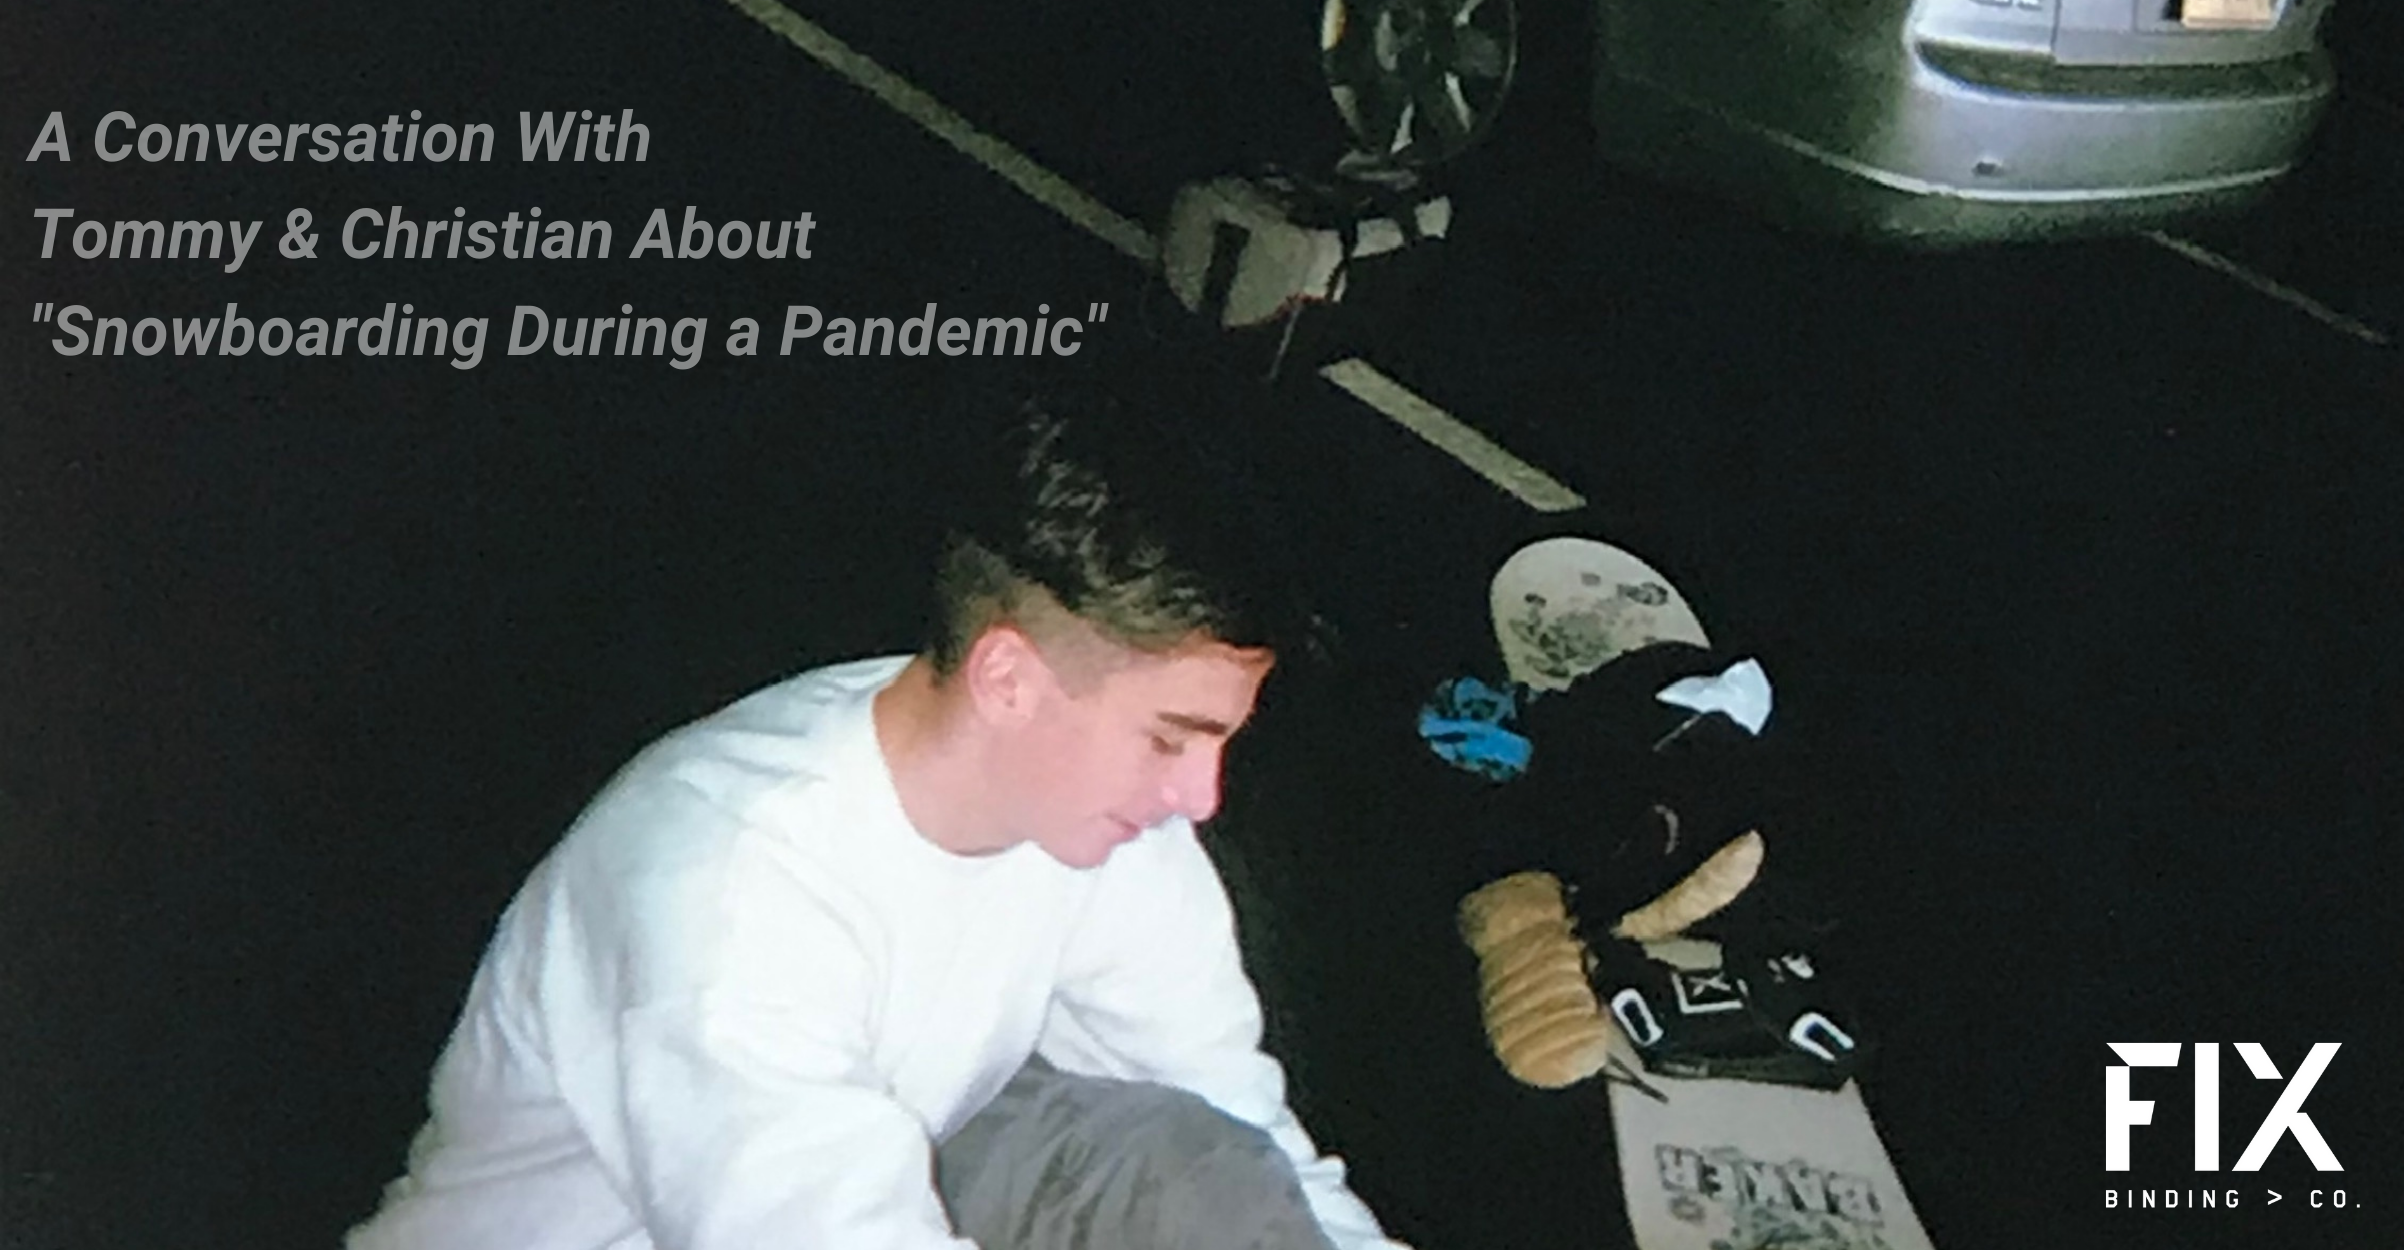 A Conversation With Tommy & Christian About "Snowboarding During a Pandemic"